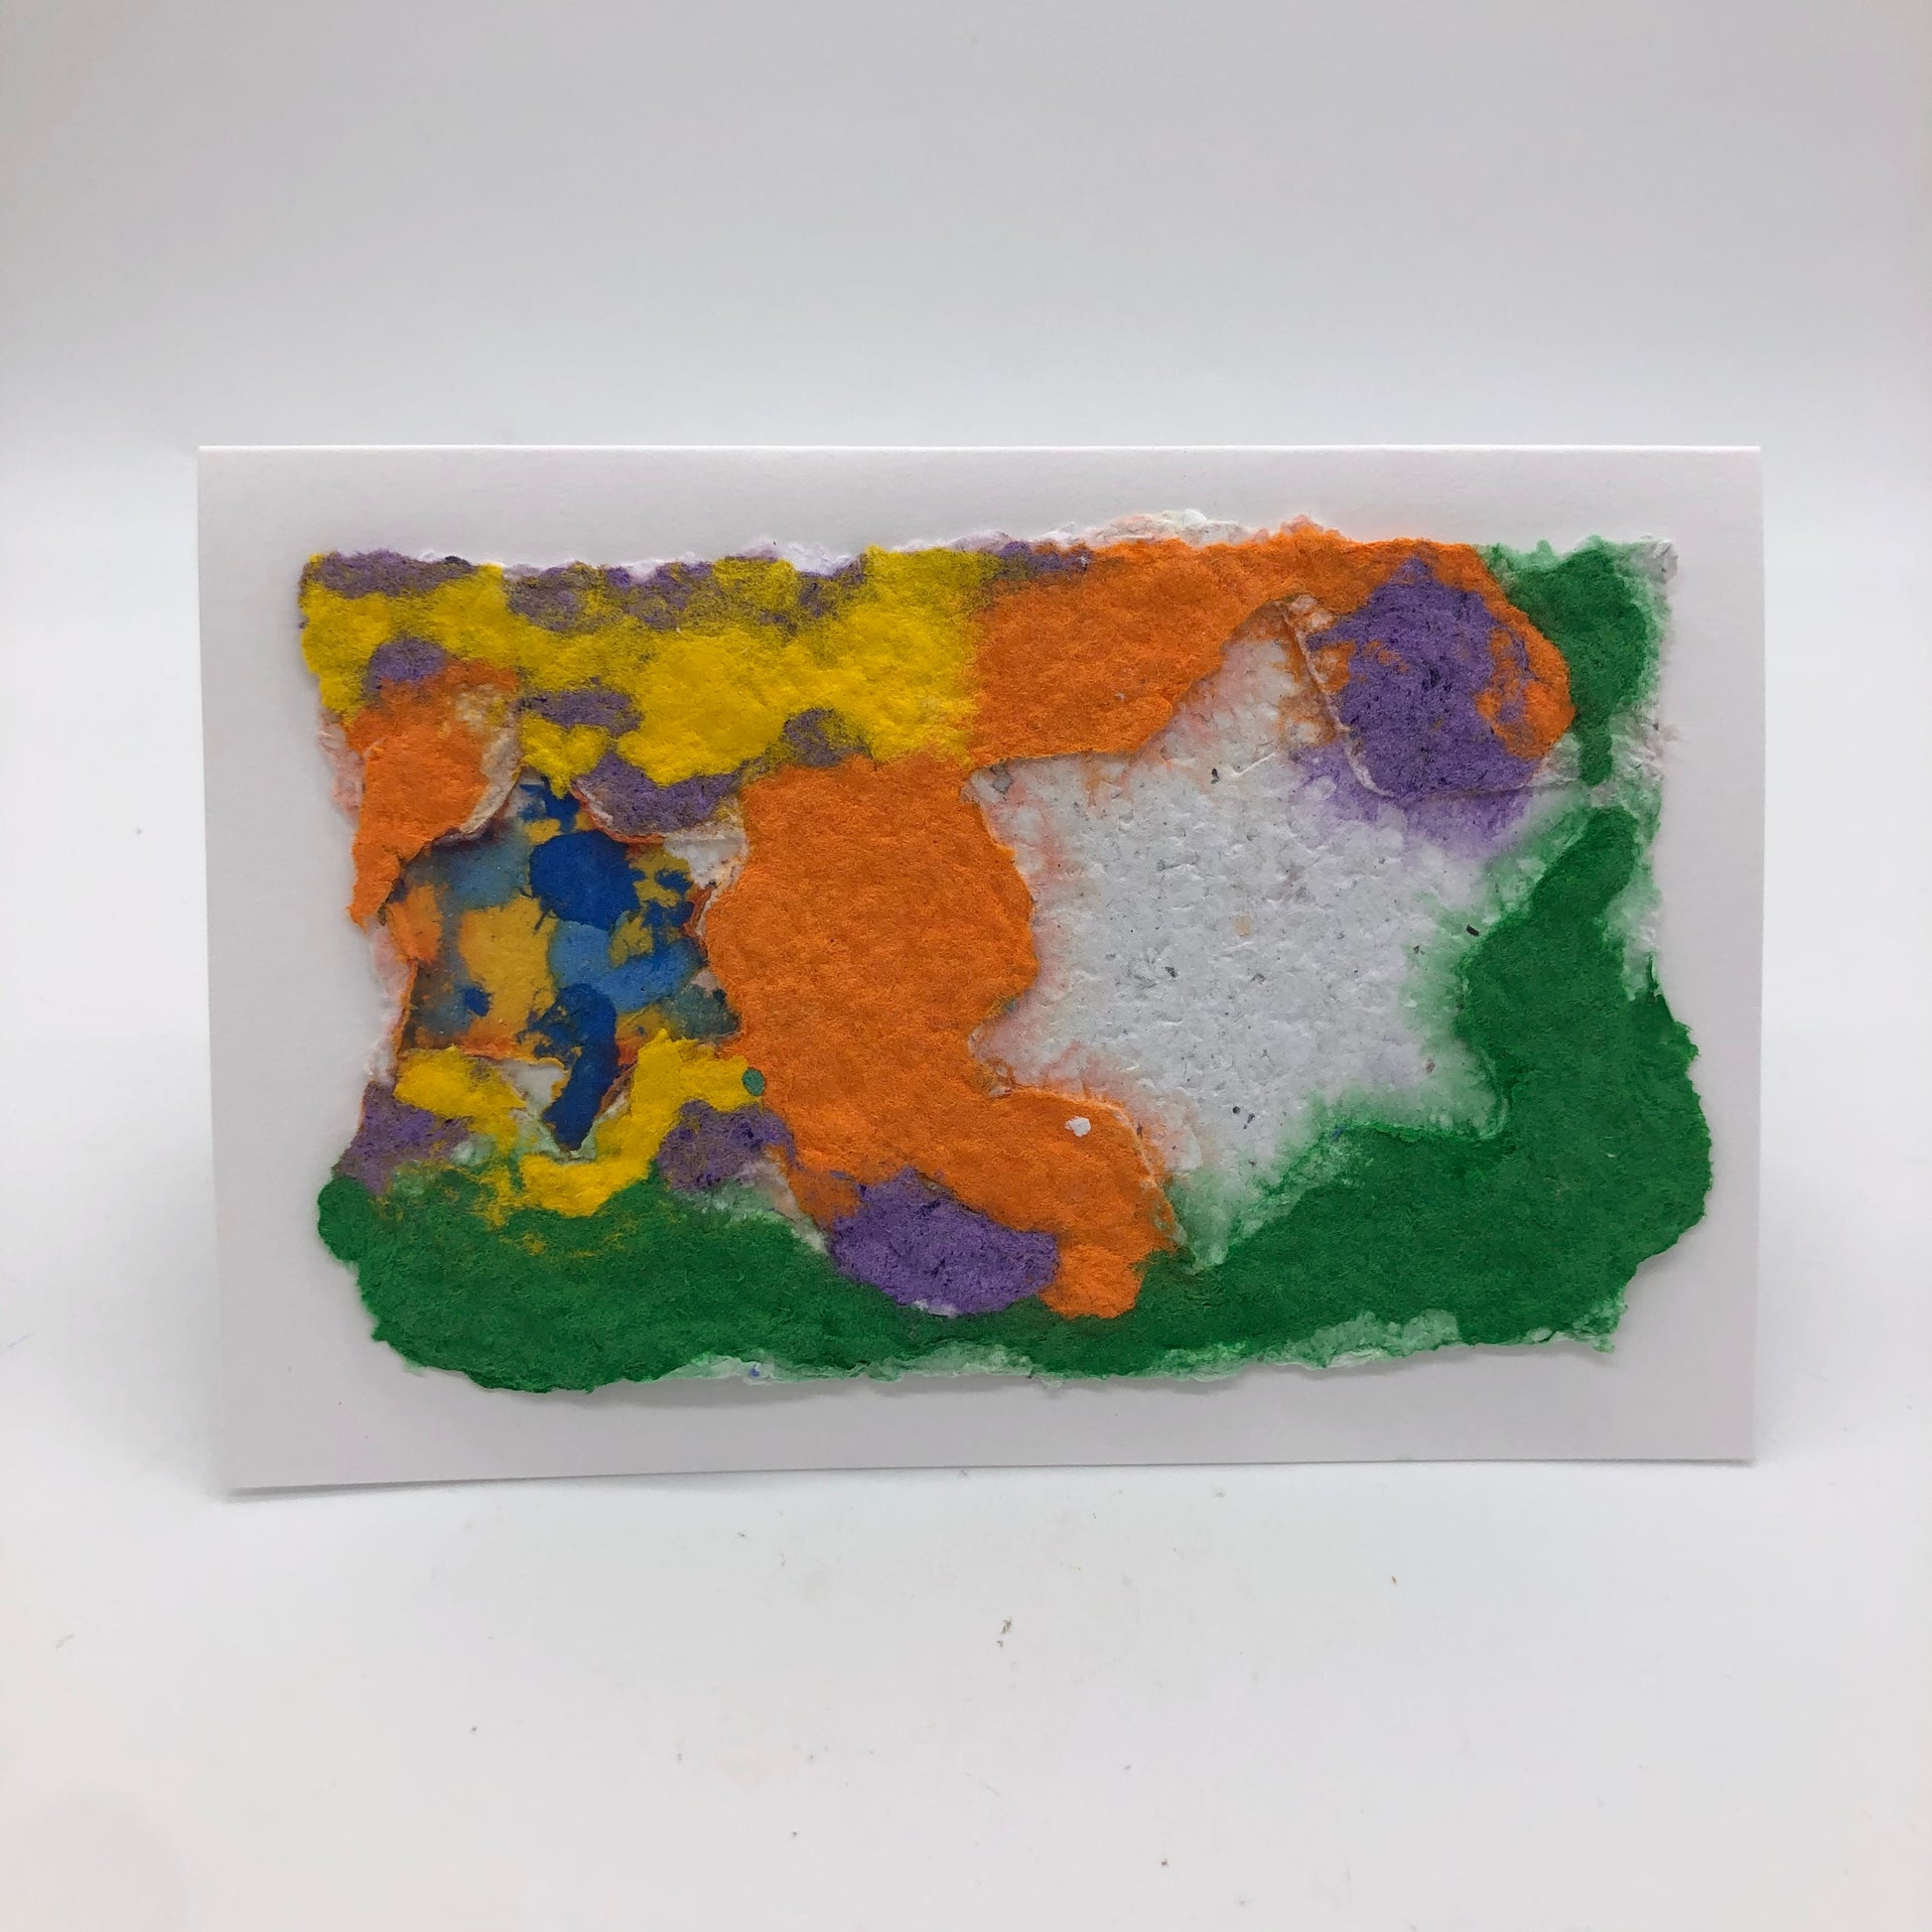 Handmade paper greeting card made with several colors including orange, green, yellow, purple and blue.  On top are two Stars of David.   One is solid white, the other has several colors on the inside.